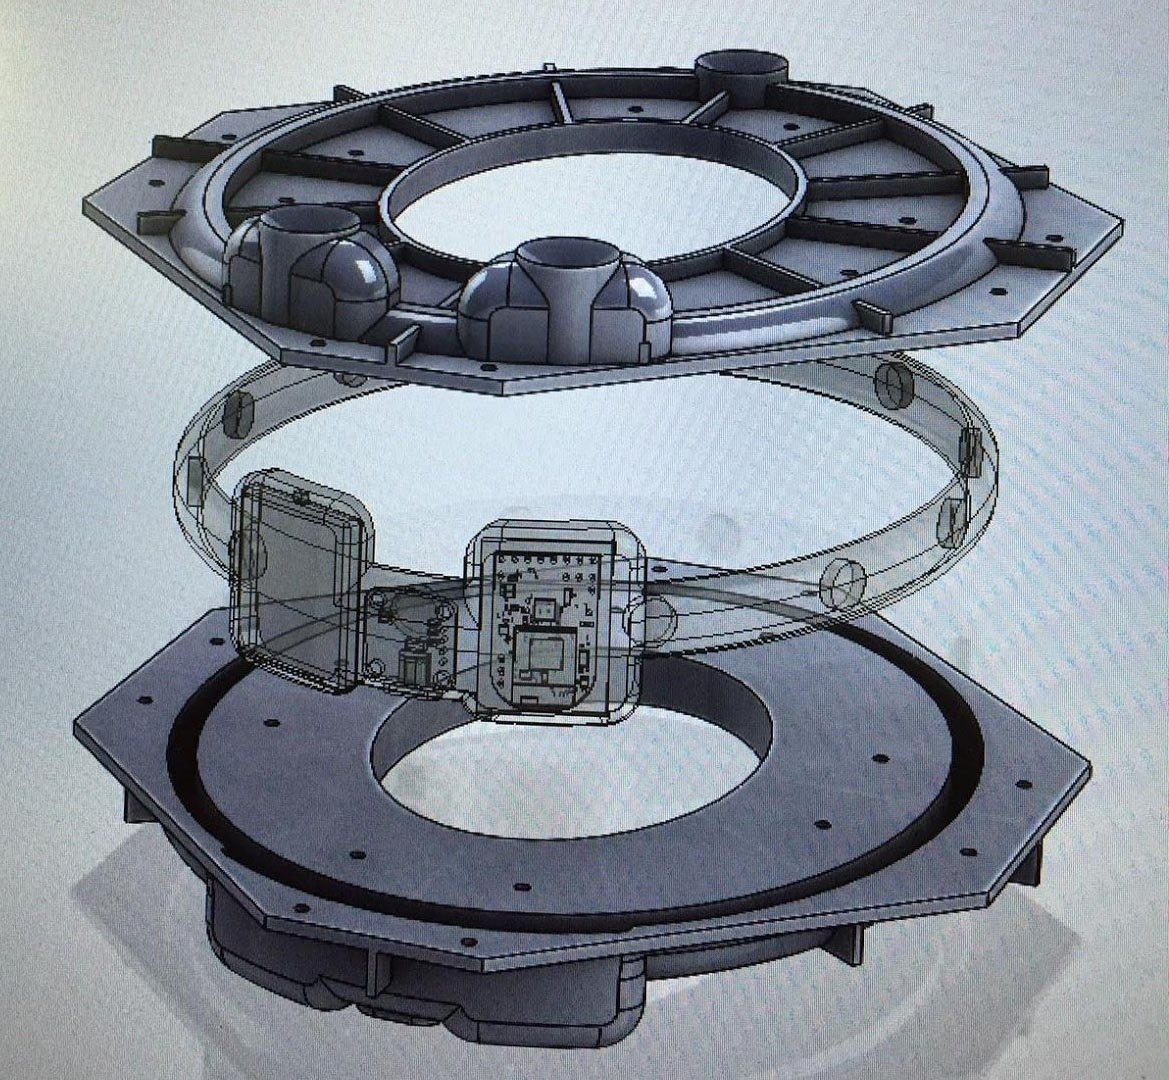 A 3D visualization of the two-part mold creating the wearable